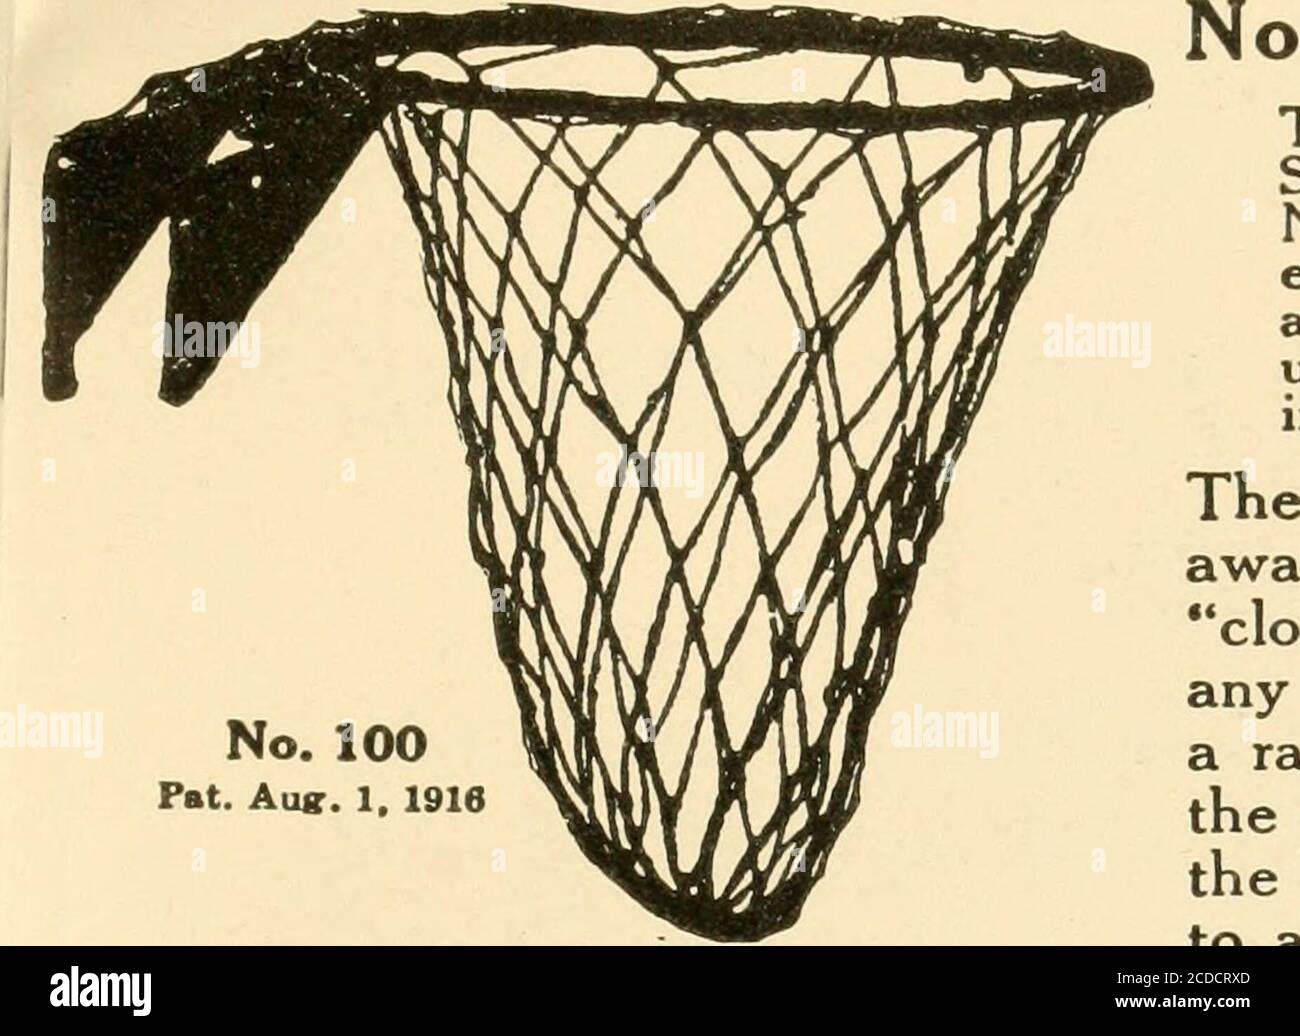 Tag det op Ikke vigtigt Kæmpe stor Exercises on the side horse . TRADE^MARK-^rMi SPALDING BASKET BALL  SUNDRIES. 100 Basket Ball Goals The Spalding No. 100 goal—made under  theSchommer patent, dated Aug. 1, 1916,No. 1,193,024—is the outcome of